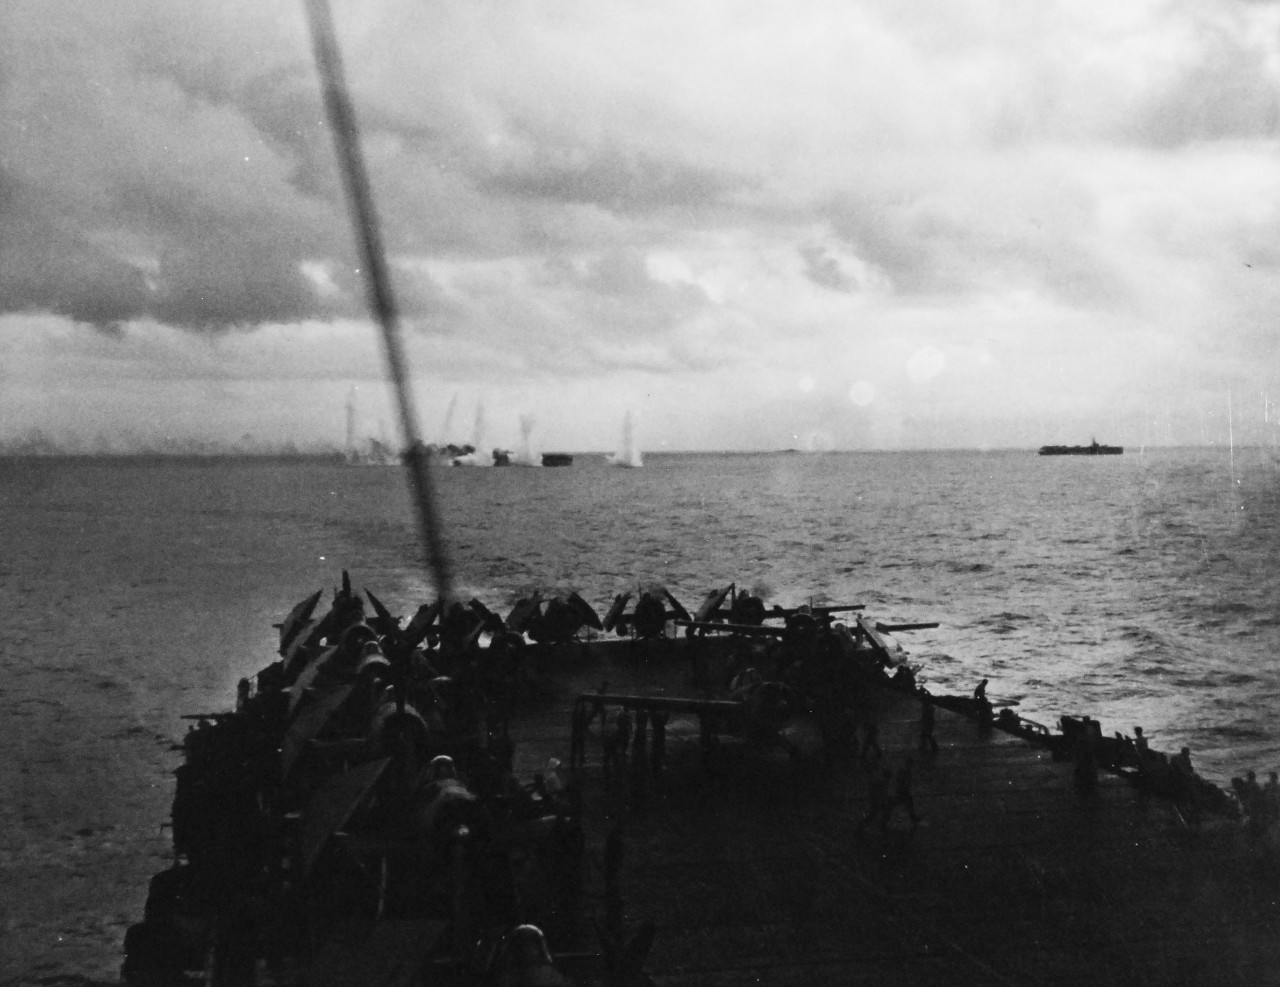 80-G-287426:   Battle off Samar, October 25, 1944.   USS Kitkun Bay (CVE 71) launches “Avengers” to engage Japanese fleet during the Battle of Leyte Gulf, 25 October 1944.   Official U.S. Navy Photograph, now in the collections of the National Archives.   (2014/5/15).  